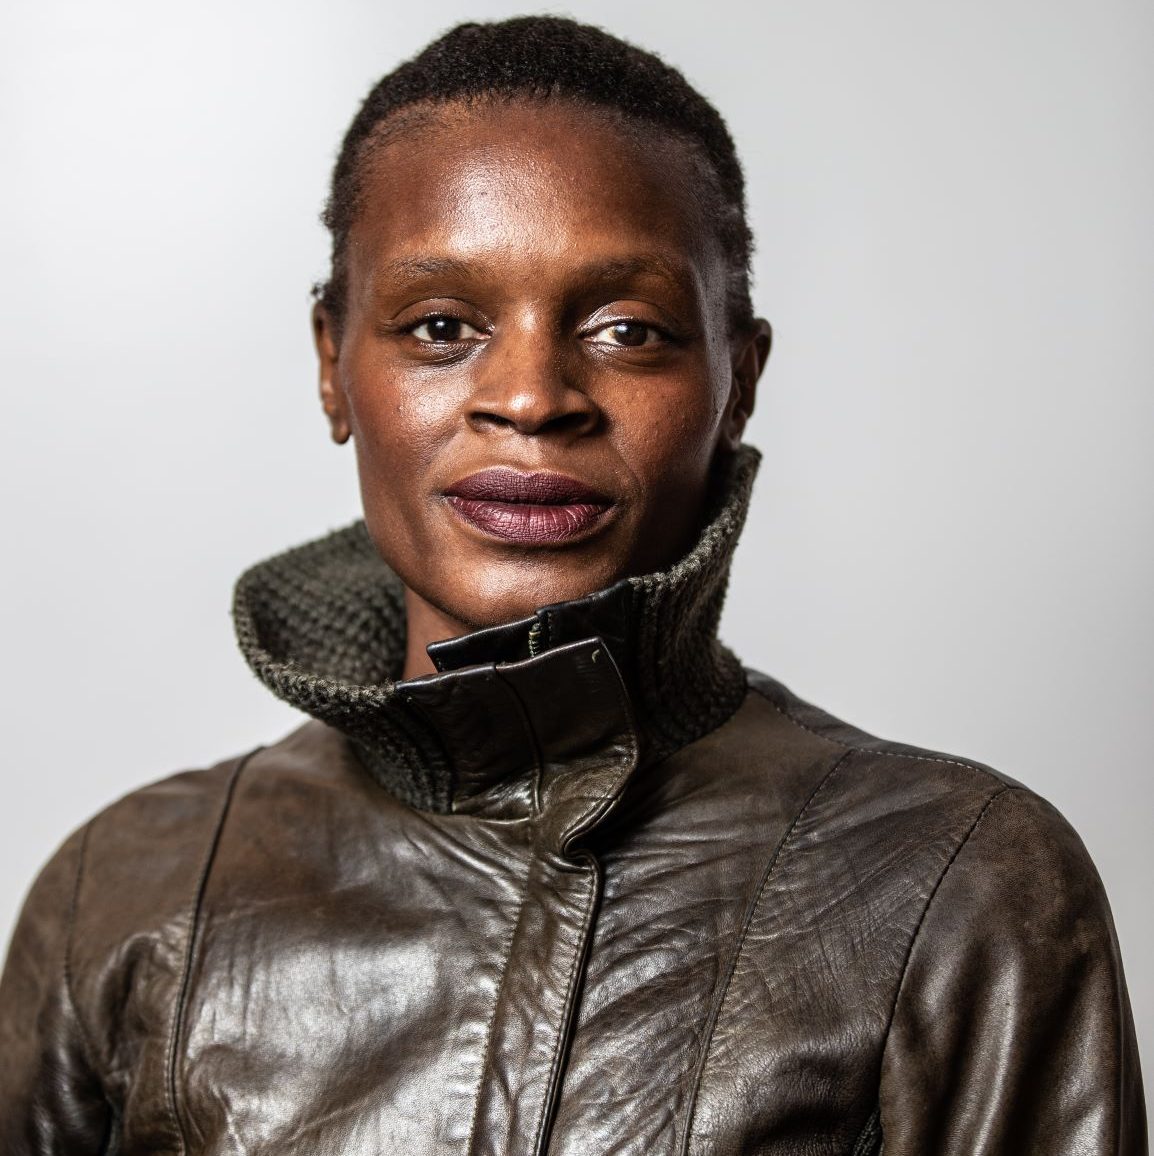 Artist in residence Okwui Okpokwasili poses for a headshot in a leather jacket.